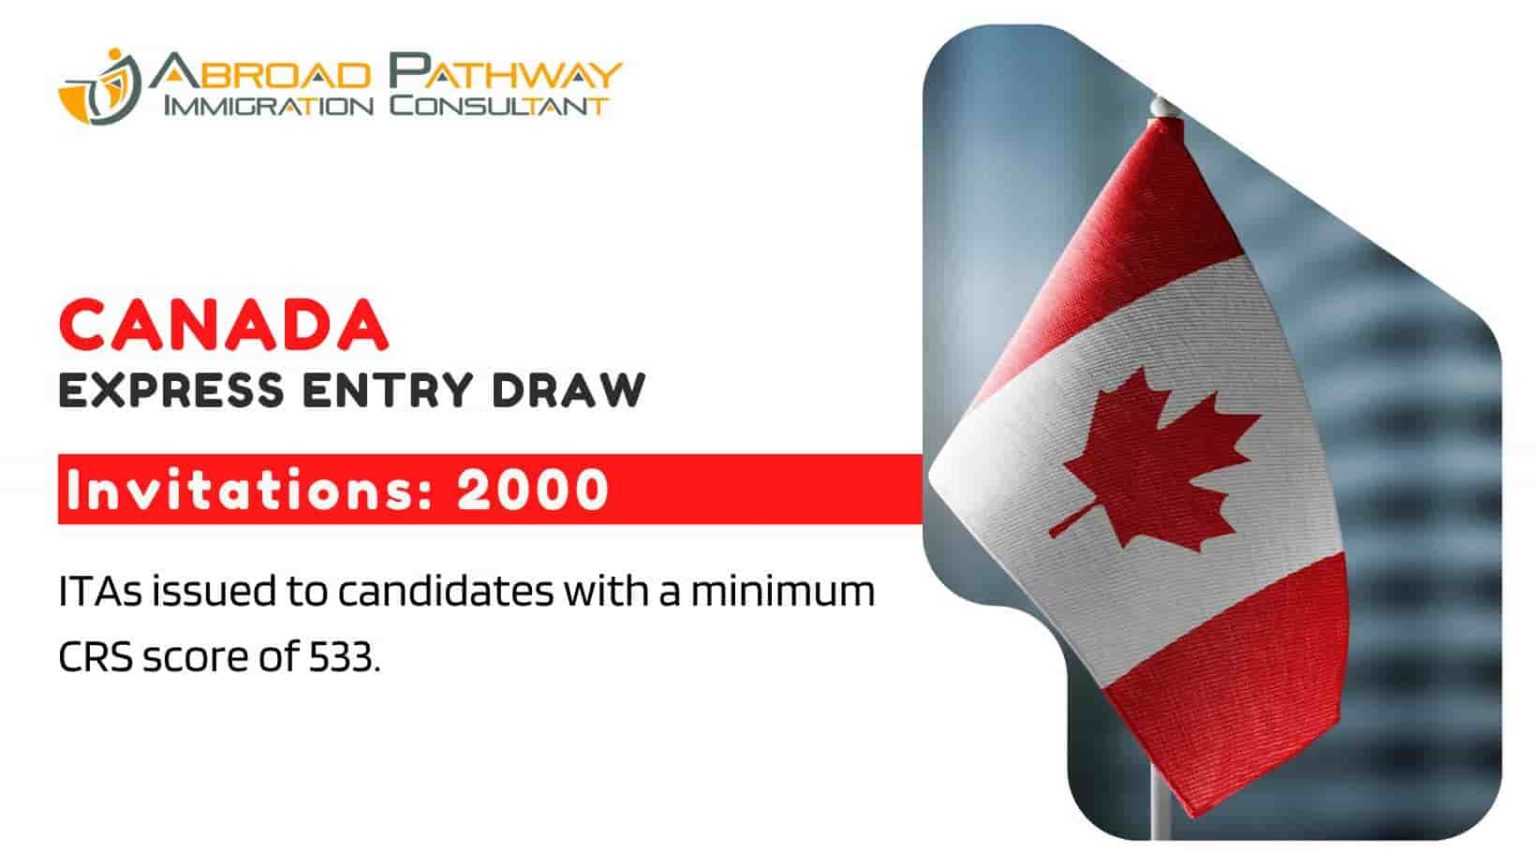 Canada invites 2,000 immigration candidates- Express Entry Draw